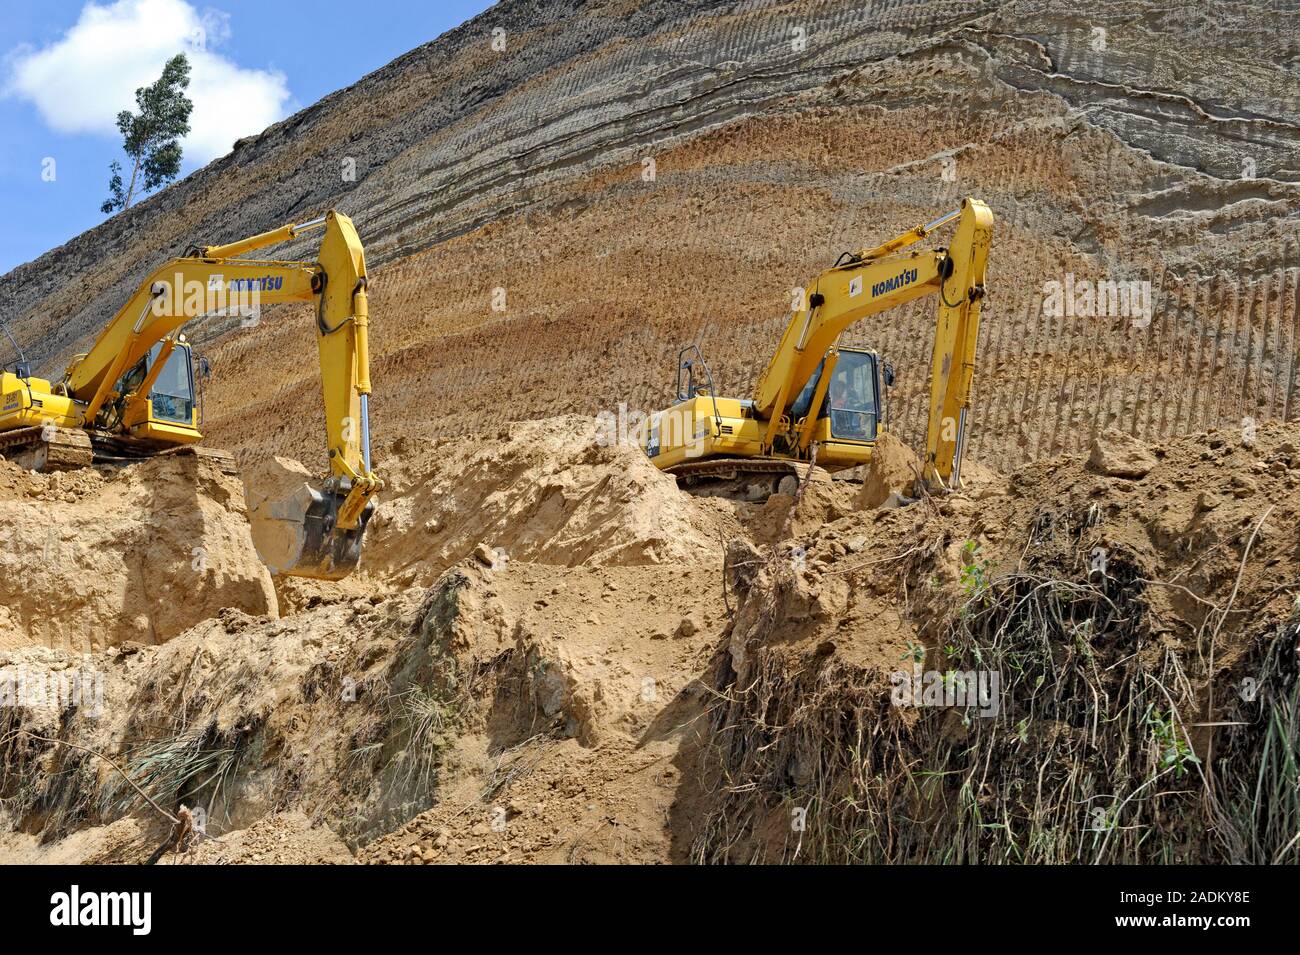 Excavators digging through volcanic deposits, making a roadway for a future highway near Quito Ecuador Stock Photo